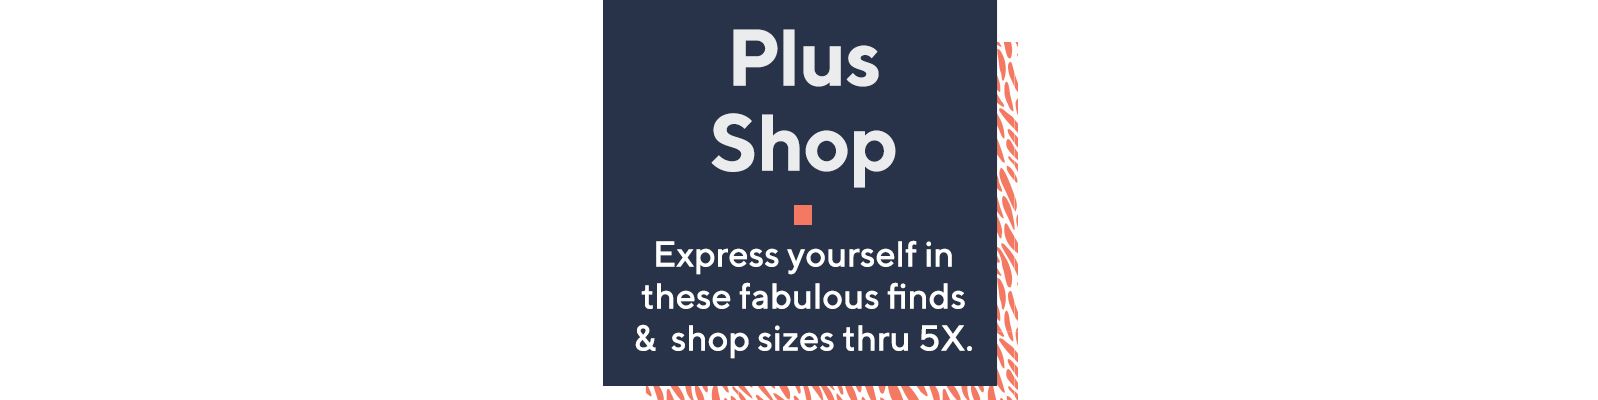 Plus Shop   Express yourself in these fabulous finds & shop sizes thru 5X. 